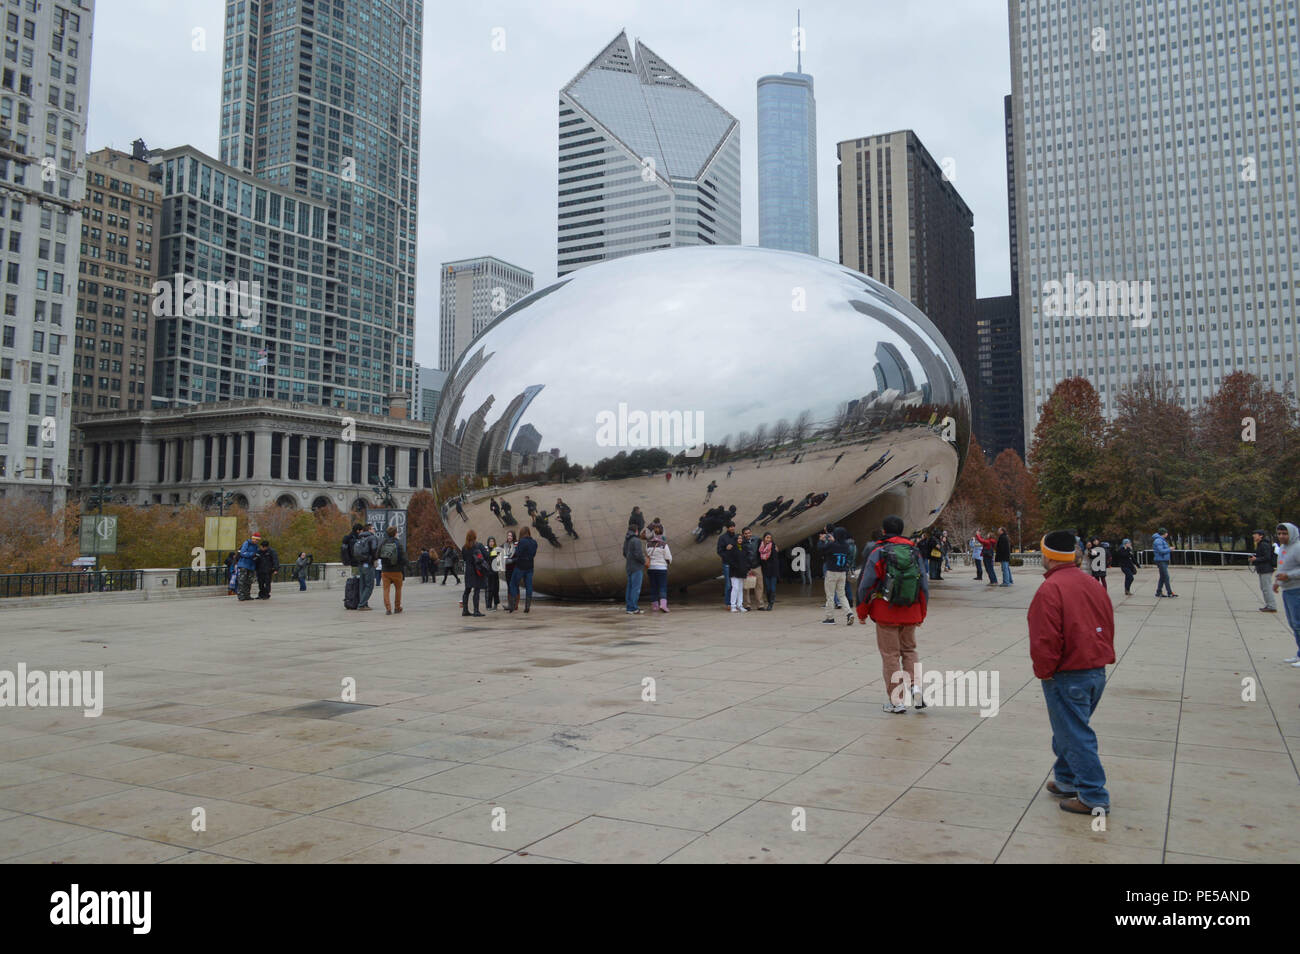 The Urban Icon Bean Sculpture At Millennium Park In Chicago Illinois With Tourists and Buildings In the Background On a Grey Winter's Day Stock Photo